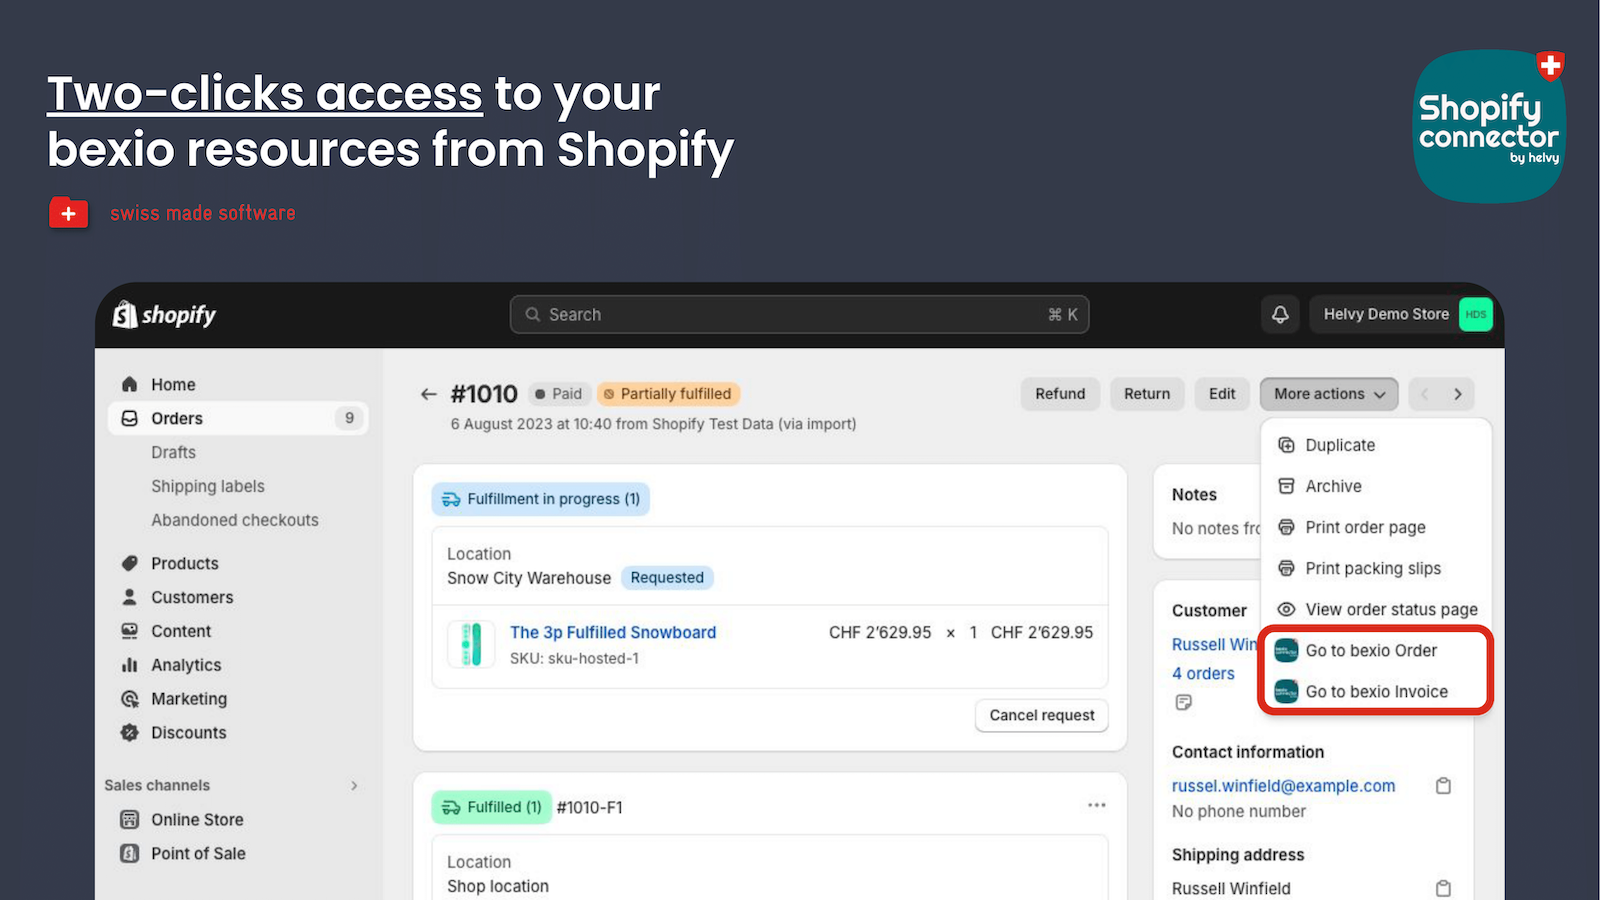 Two-clicks access to your bexio resources from Shopify